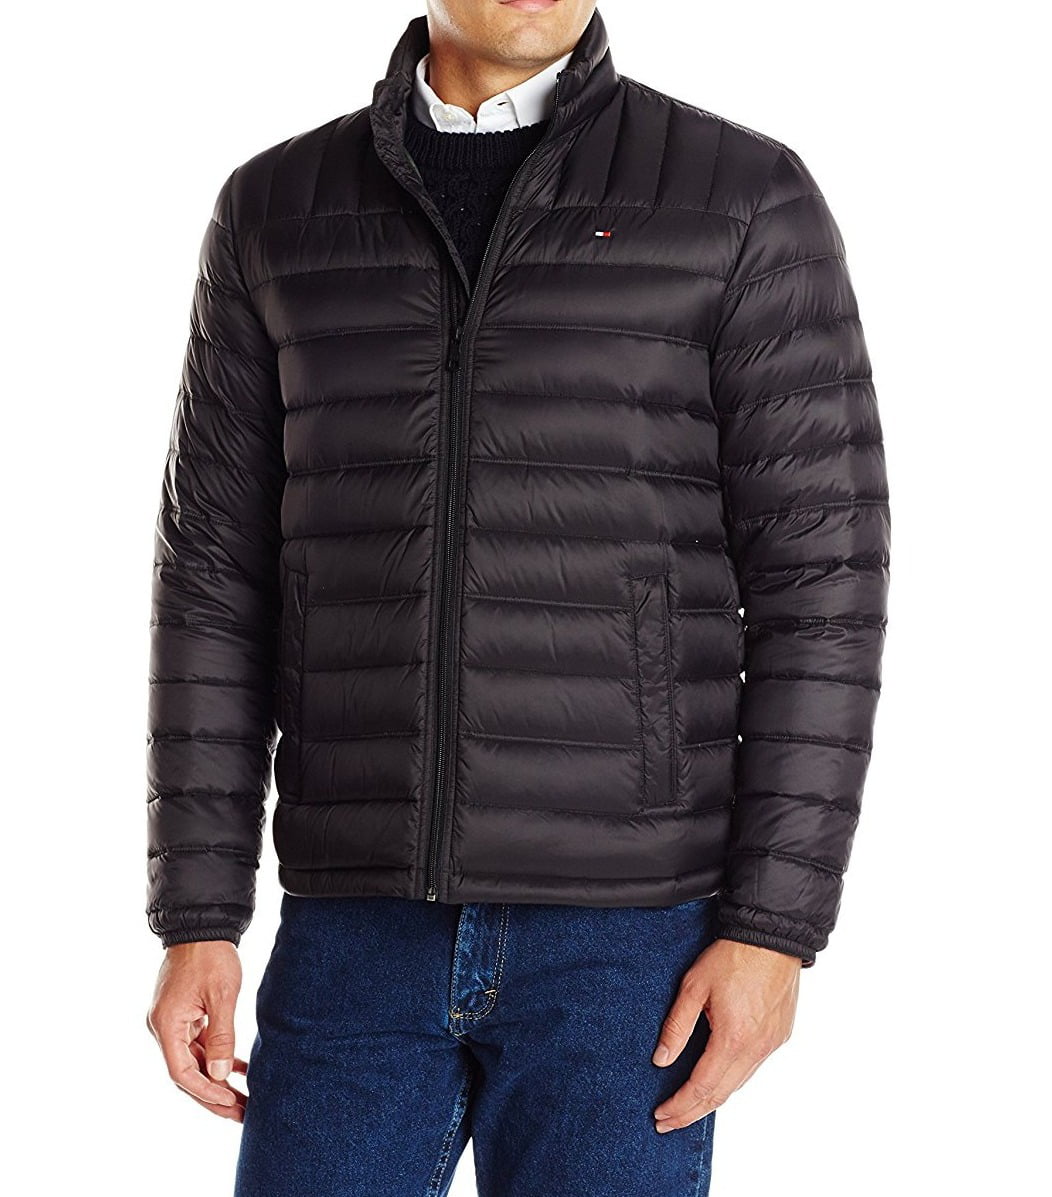 Tommy Hilfiger - Tommy Hilfiger NEW Black Mens Size 3XL Quilted Full ...